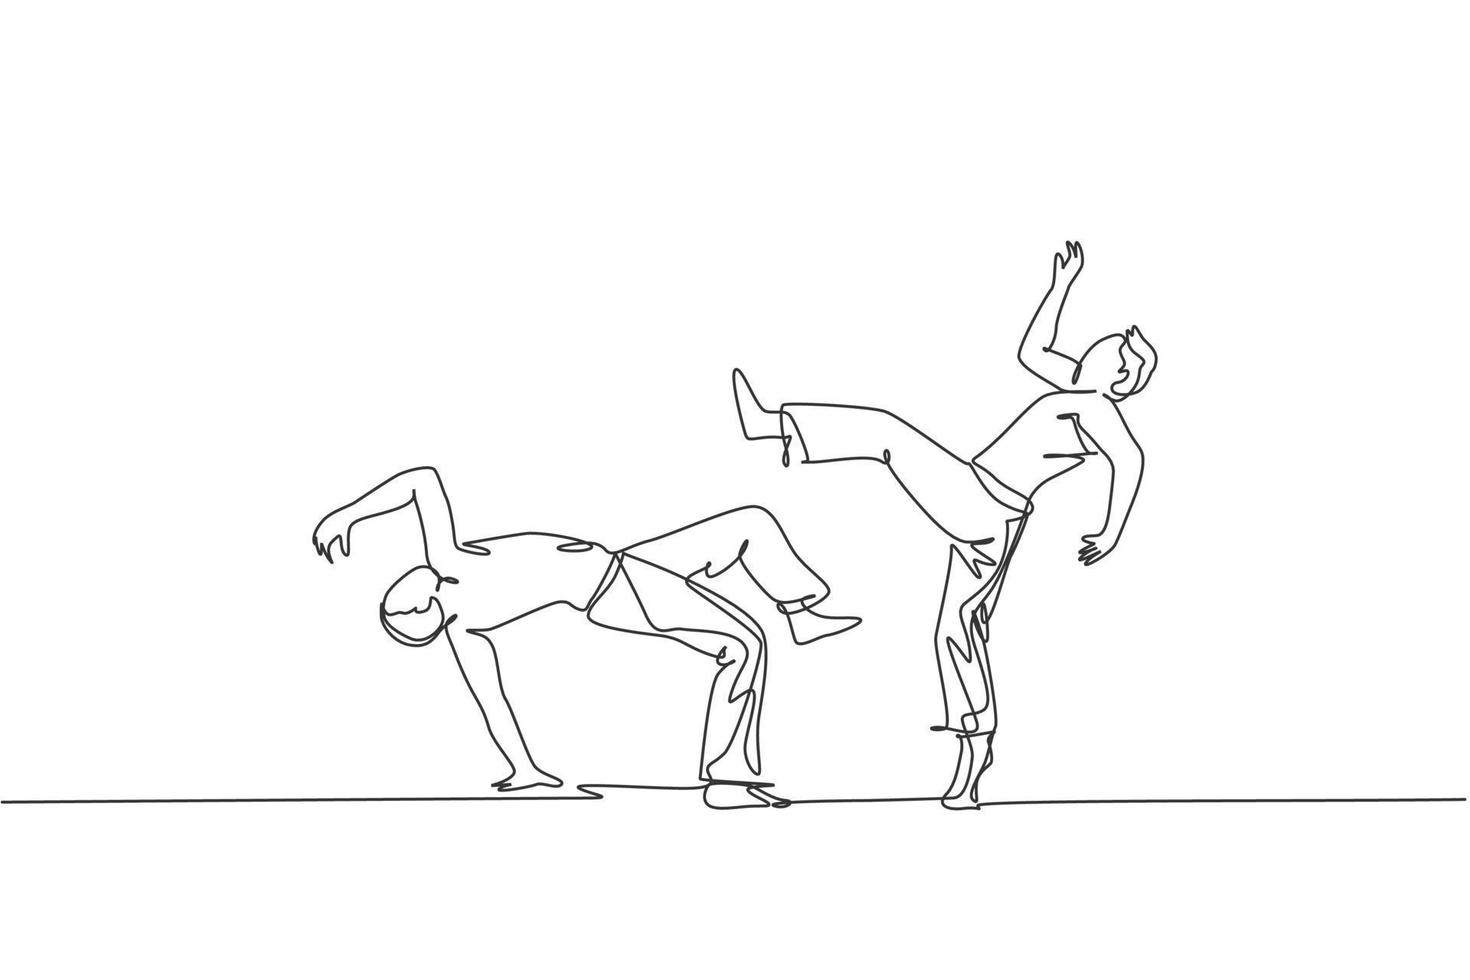 Single continuous line drawing of two young sportive men practice Brazilian capoeira move dance at outdoor street. Culture martial art sport concept. Trendy one line draw design vector illustration